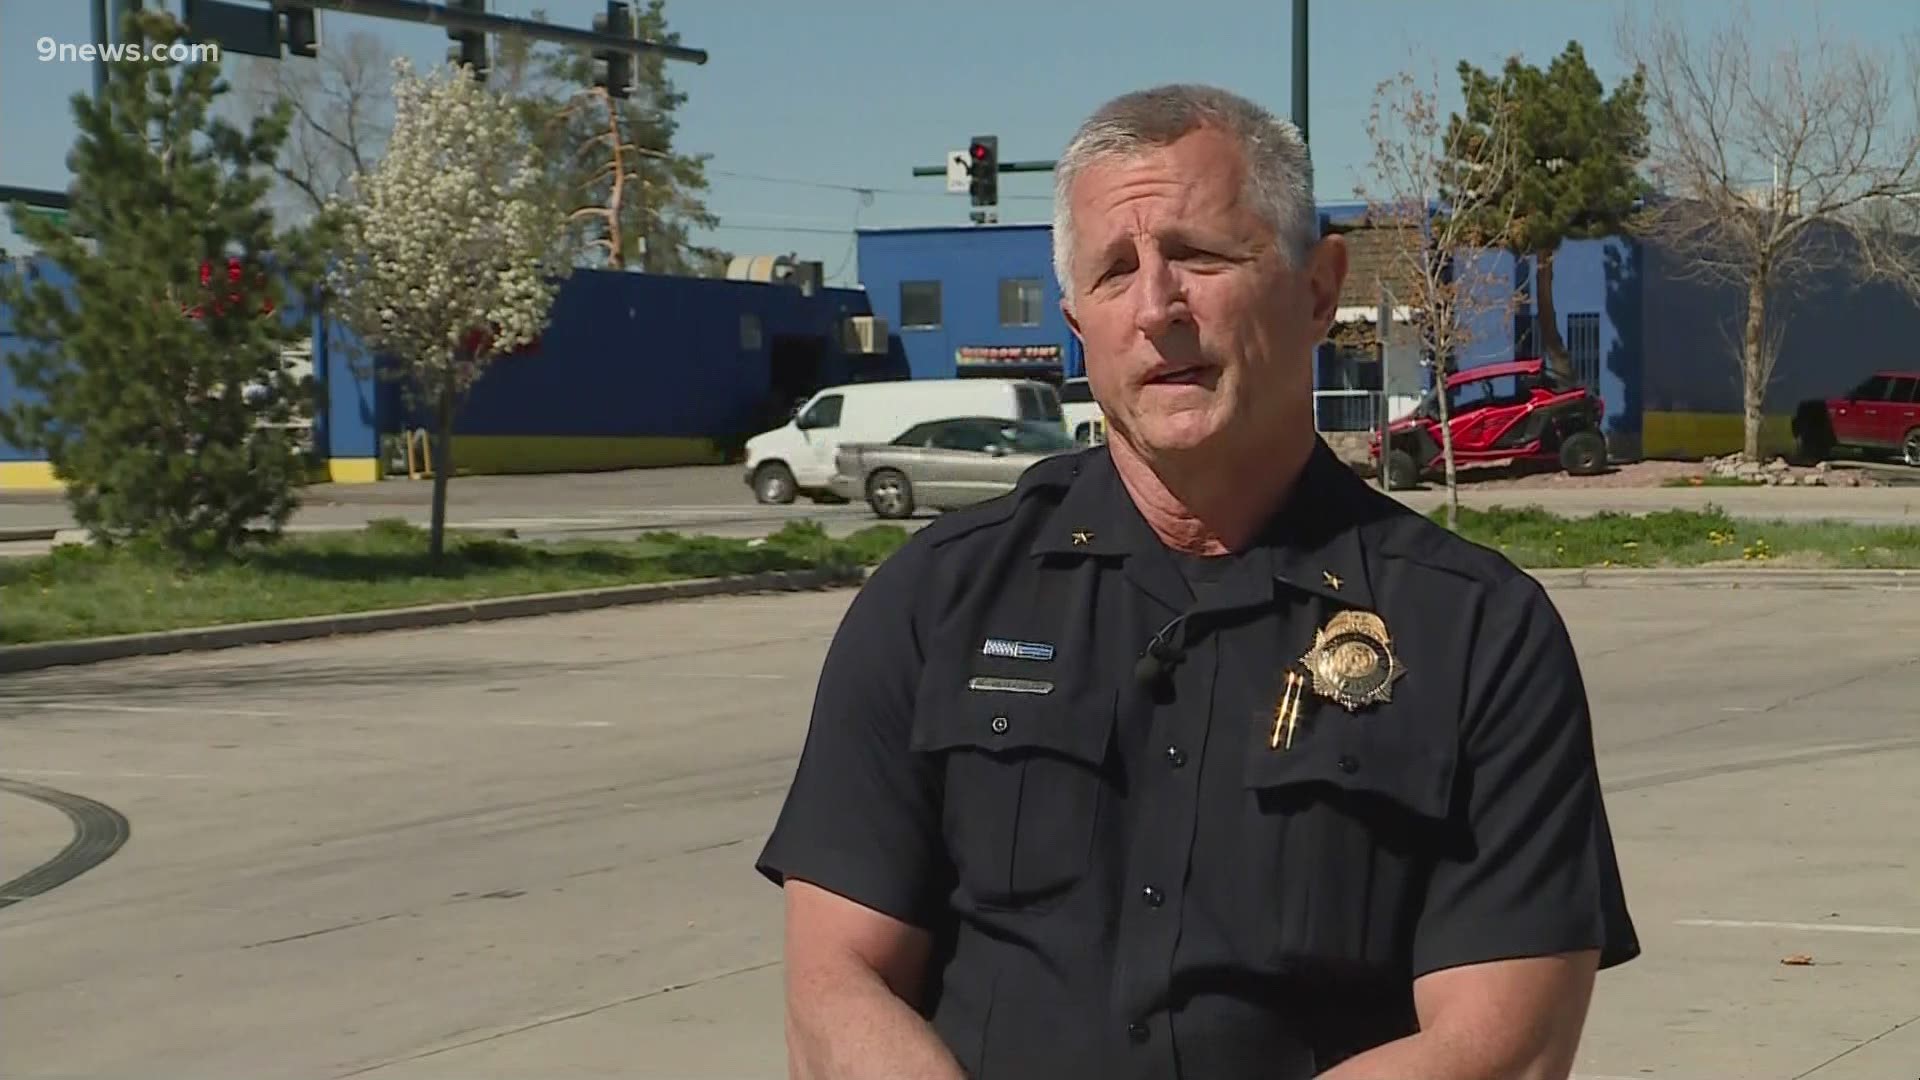 Denver Police held a news conference Thursday to discuss traffic and safety ahead of the Cinco de Mayo holiday.